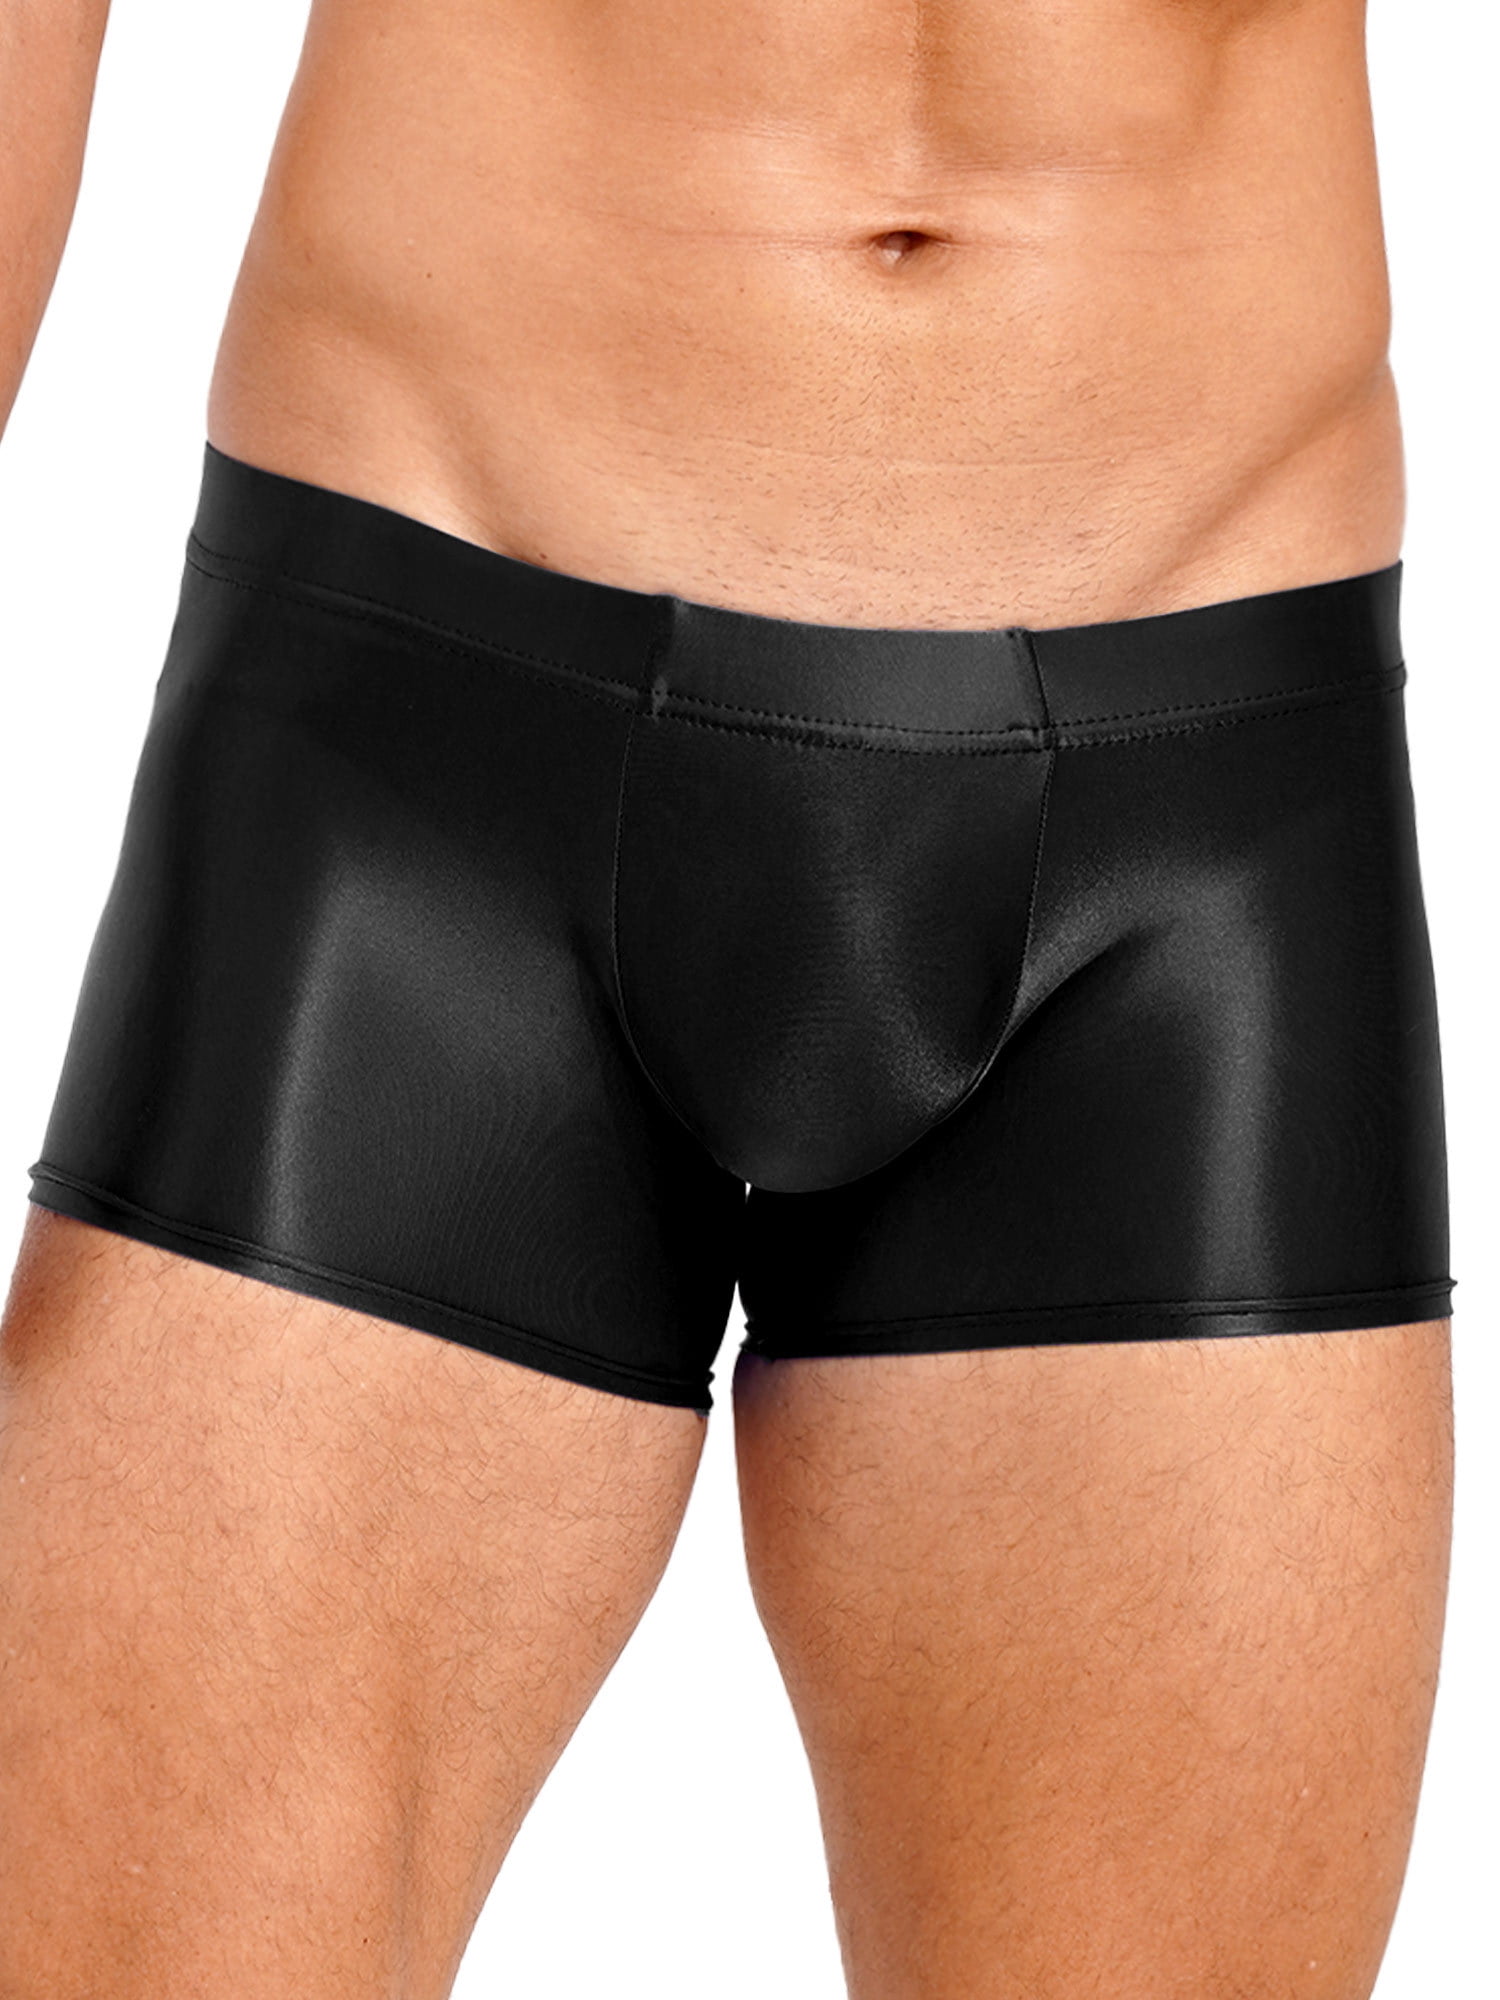 Blackspade Men's Boxer Briefs - Comfortable and Stylish Underwear for Daily  Wear and Workouts (as1, alpha, s, regular, regular, Black) at  Men's  Clothing store